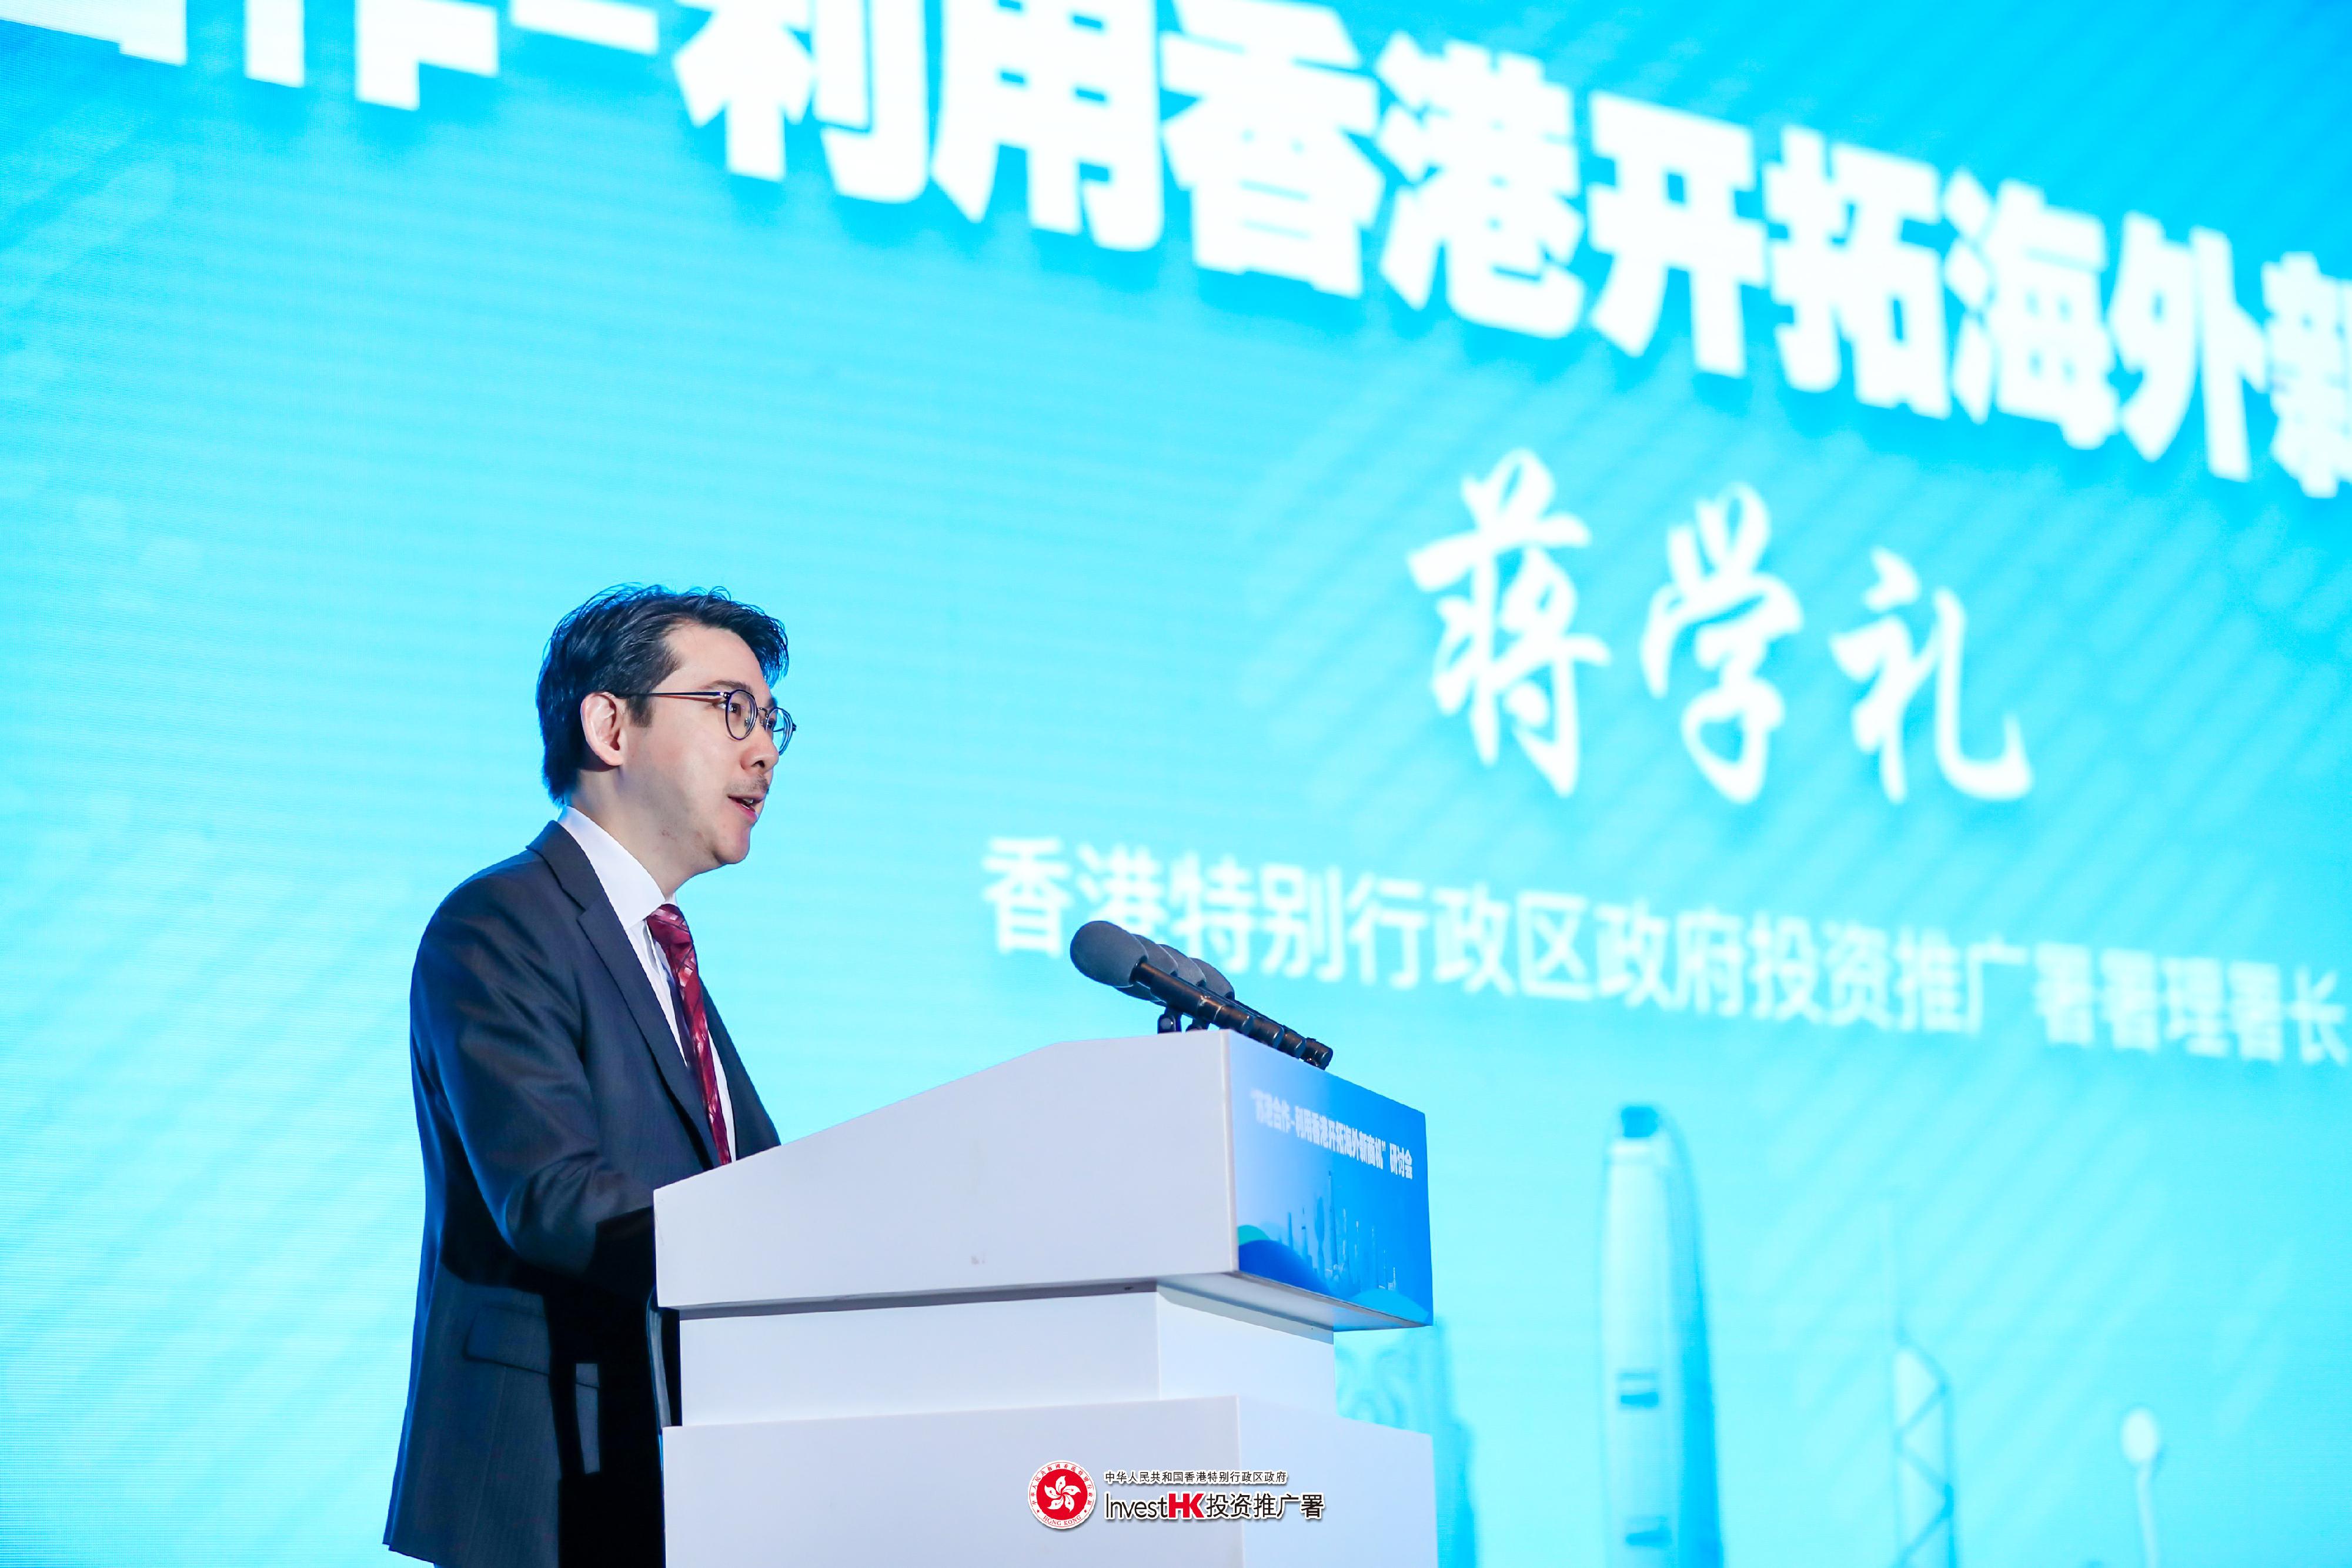 Invest Hong Kong (InvestHK) and Jiangsu Provincial Government co-hosted a seminar in Nantong, Jiangsu Province today (November 7), encouraging Jiangsu enterprises to make use of Hong Kong's business advantages and opportunities amid the Belt and Road Initiative and the Guangdong-Hong Kong-Macao Greater Bay Area development to accelerate their overseas expansion. Photo shows the Acting Director-General of Investment Promotion at InvestHK, Dr Jimmy Chiang, delivering welcome remarks.